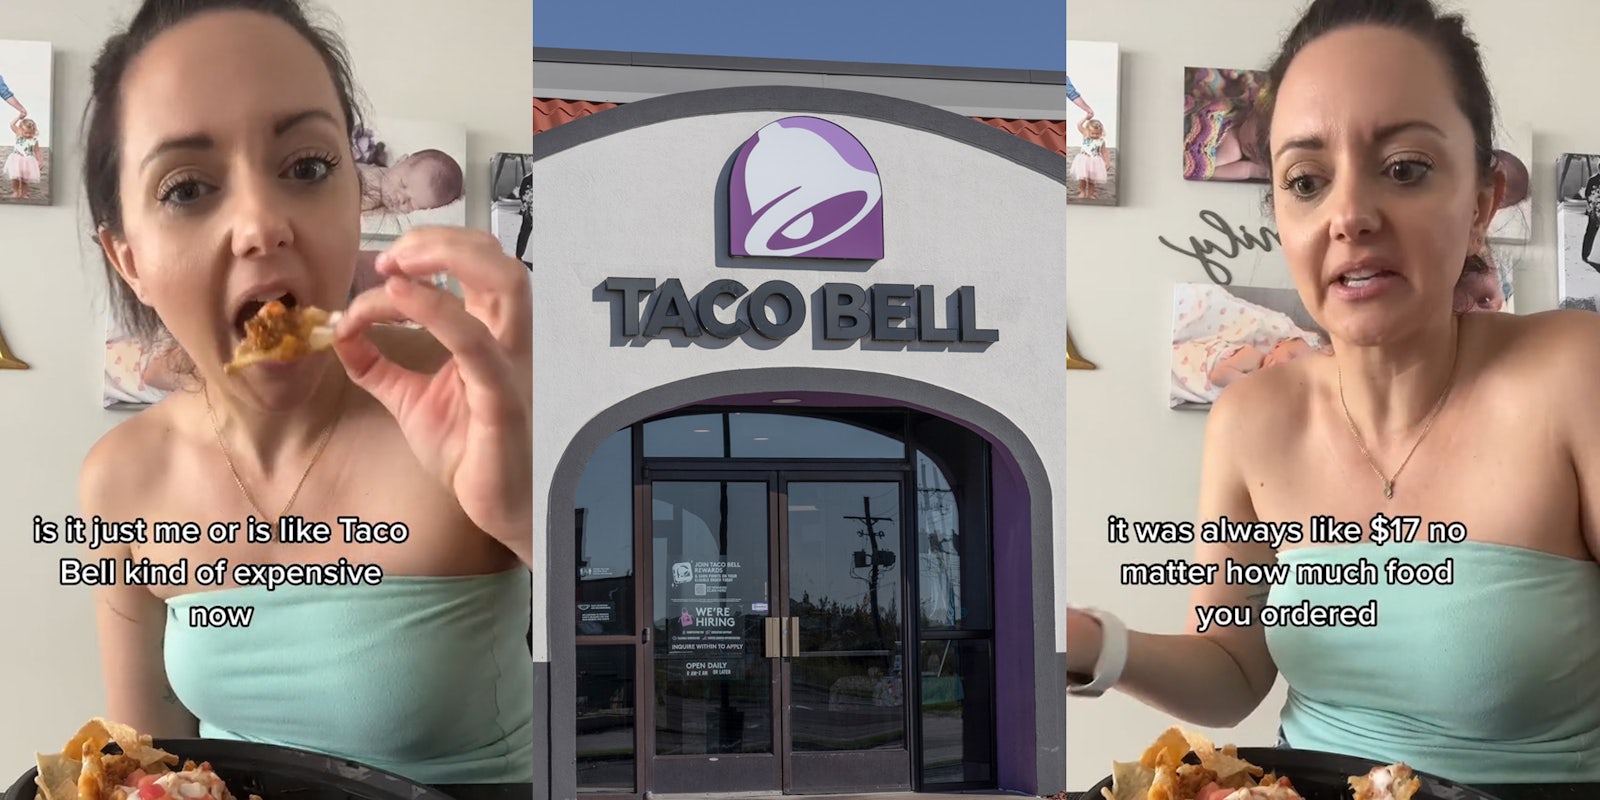 Taco Bell customer eating with caption 'is it just me or is Taco Bell kind of expensive now' (l) Taco Bell building with sign (c) Taco Bell customer speaking with caption 'it was always like $17 no matter how much food you ordered' (r)